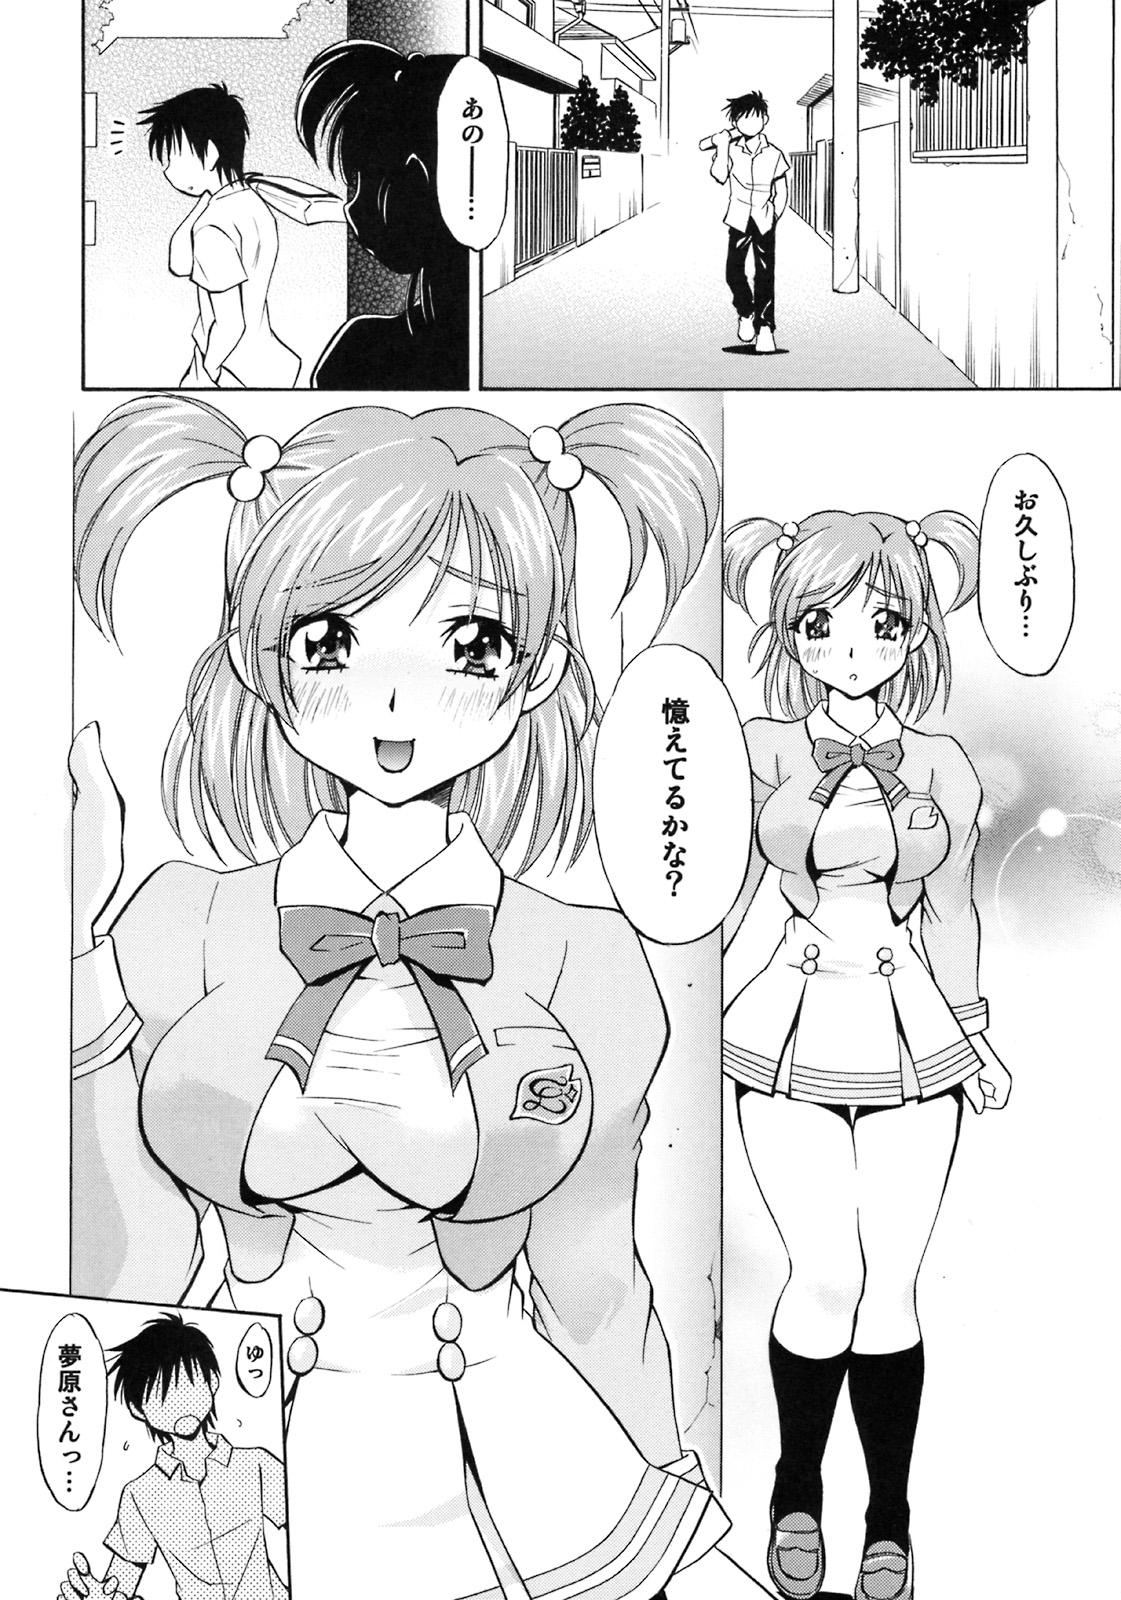 Tight Cure Musume Karen & Nozomi - Yes precure 5 Hot Whores - Page 5